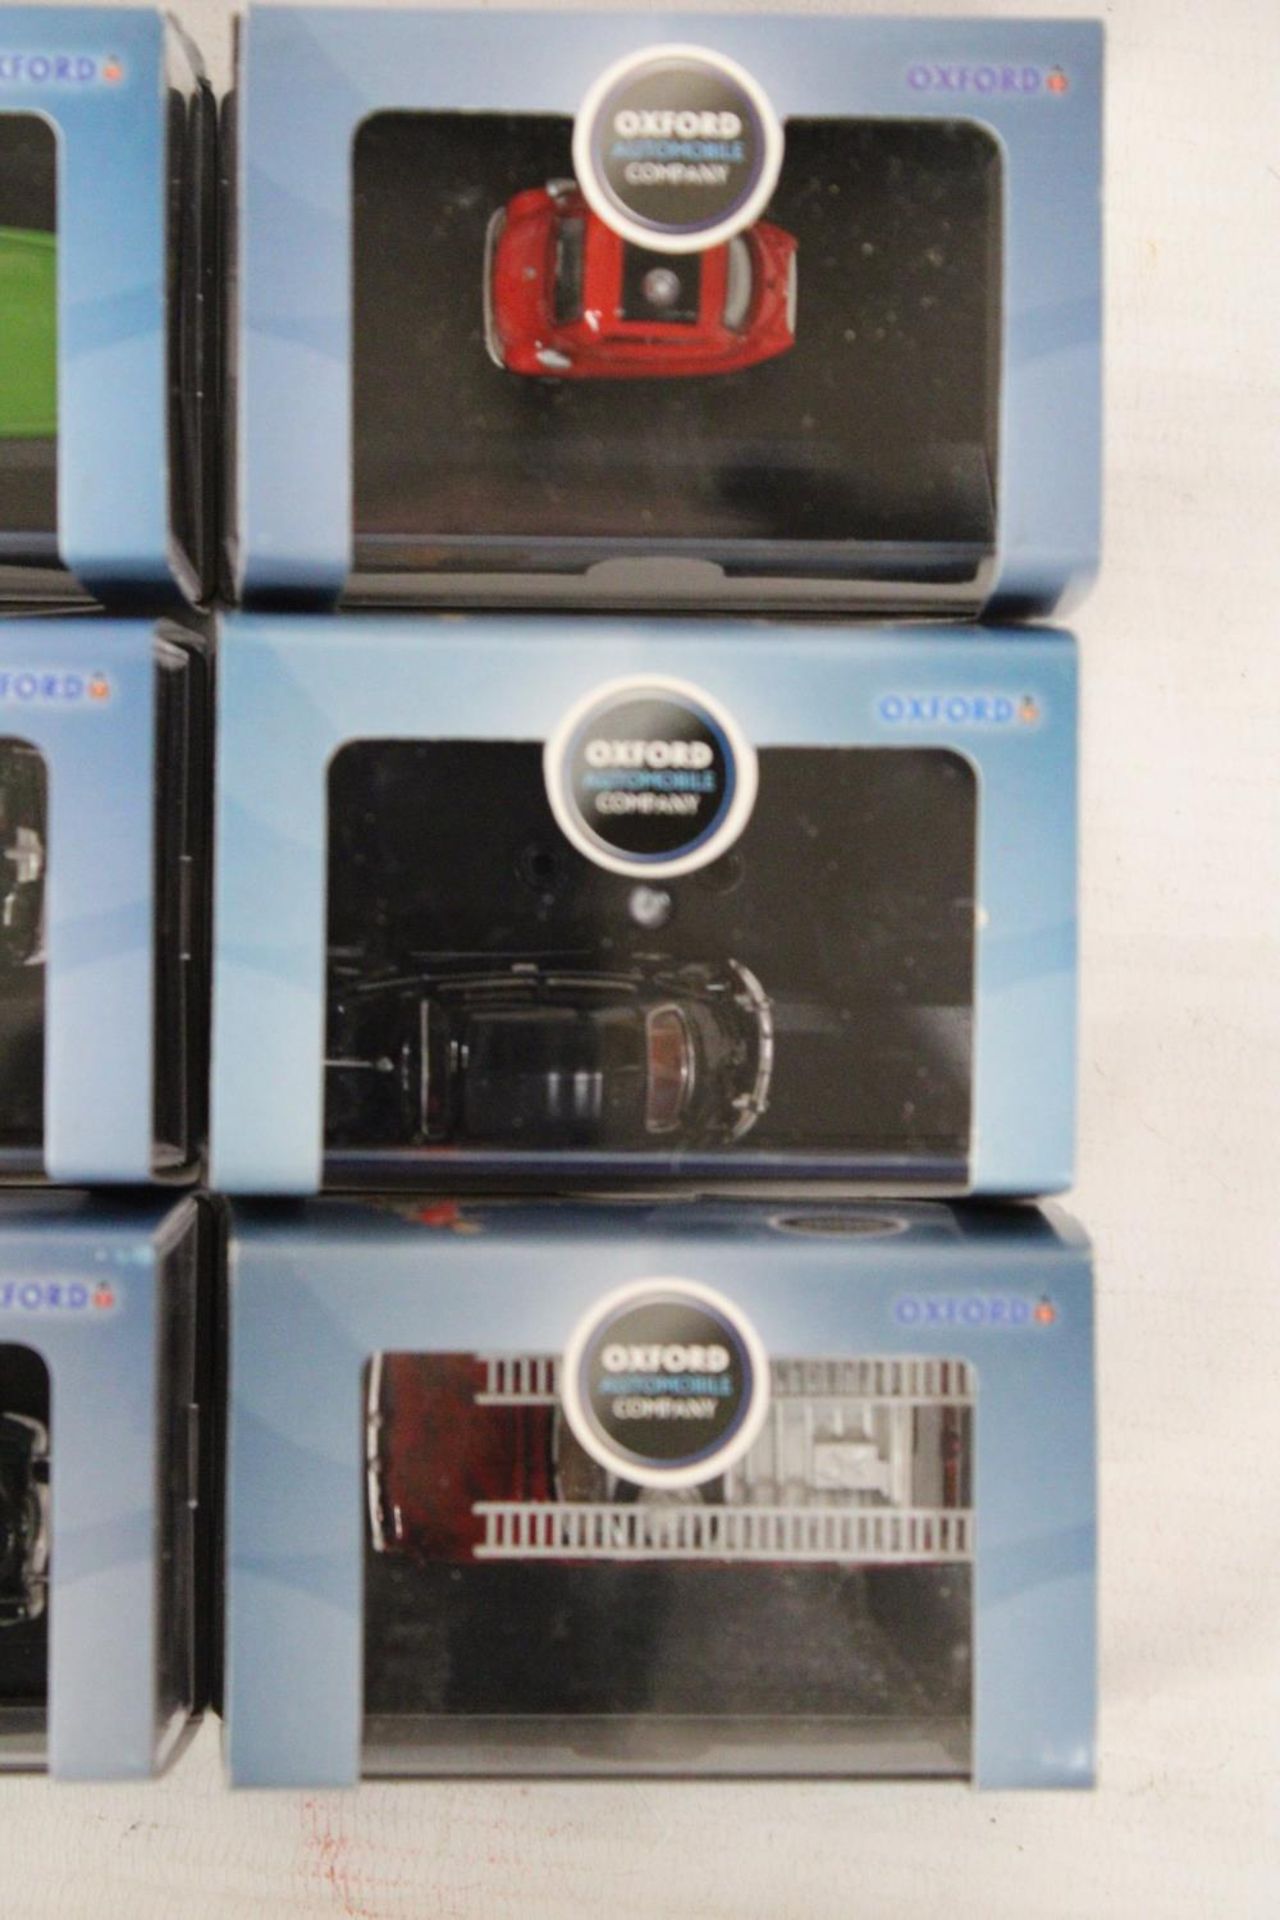 SIX VARIOUS AS NEW AND BOXED OXFORD AUTOMOBILE COMPANY VEHICLES - Image 8 of 8